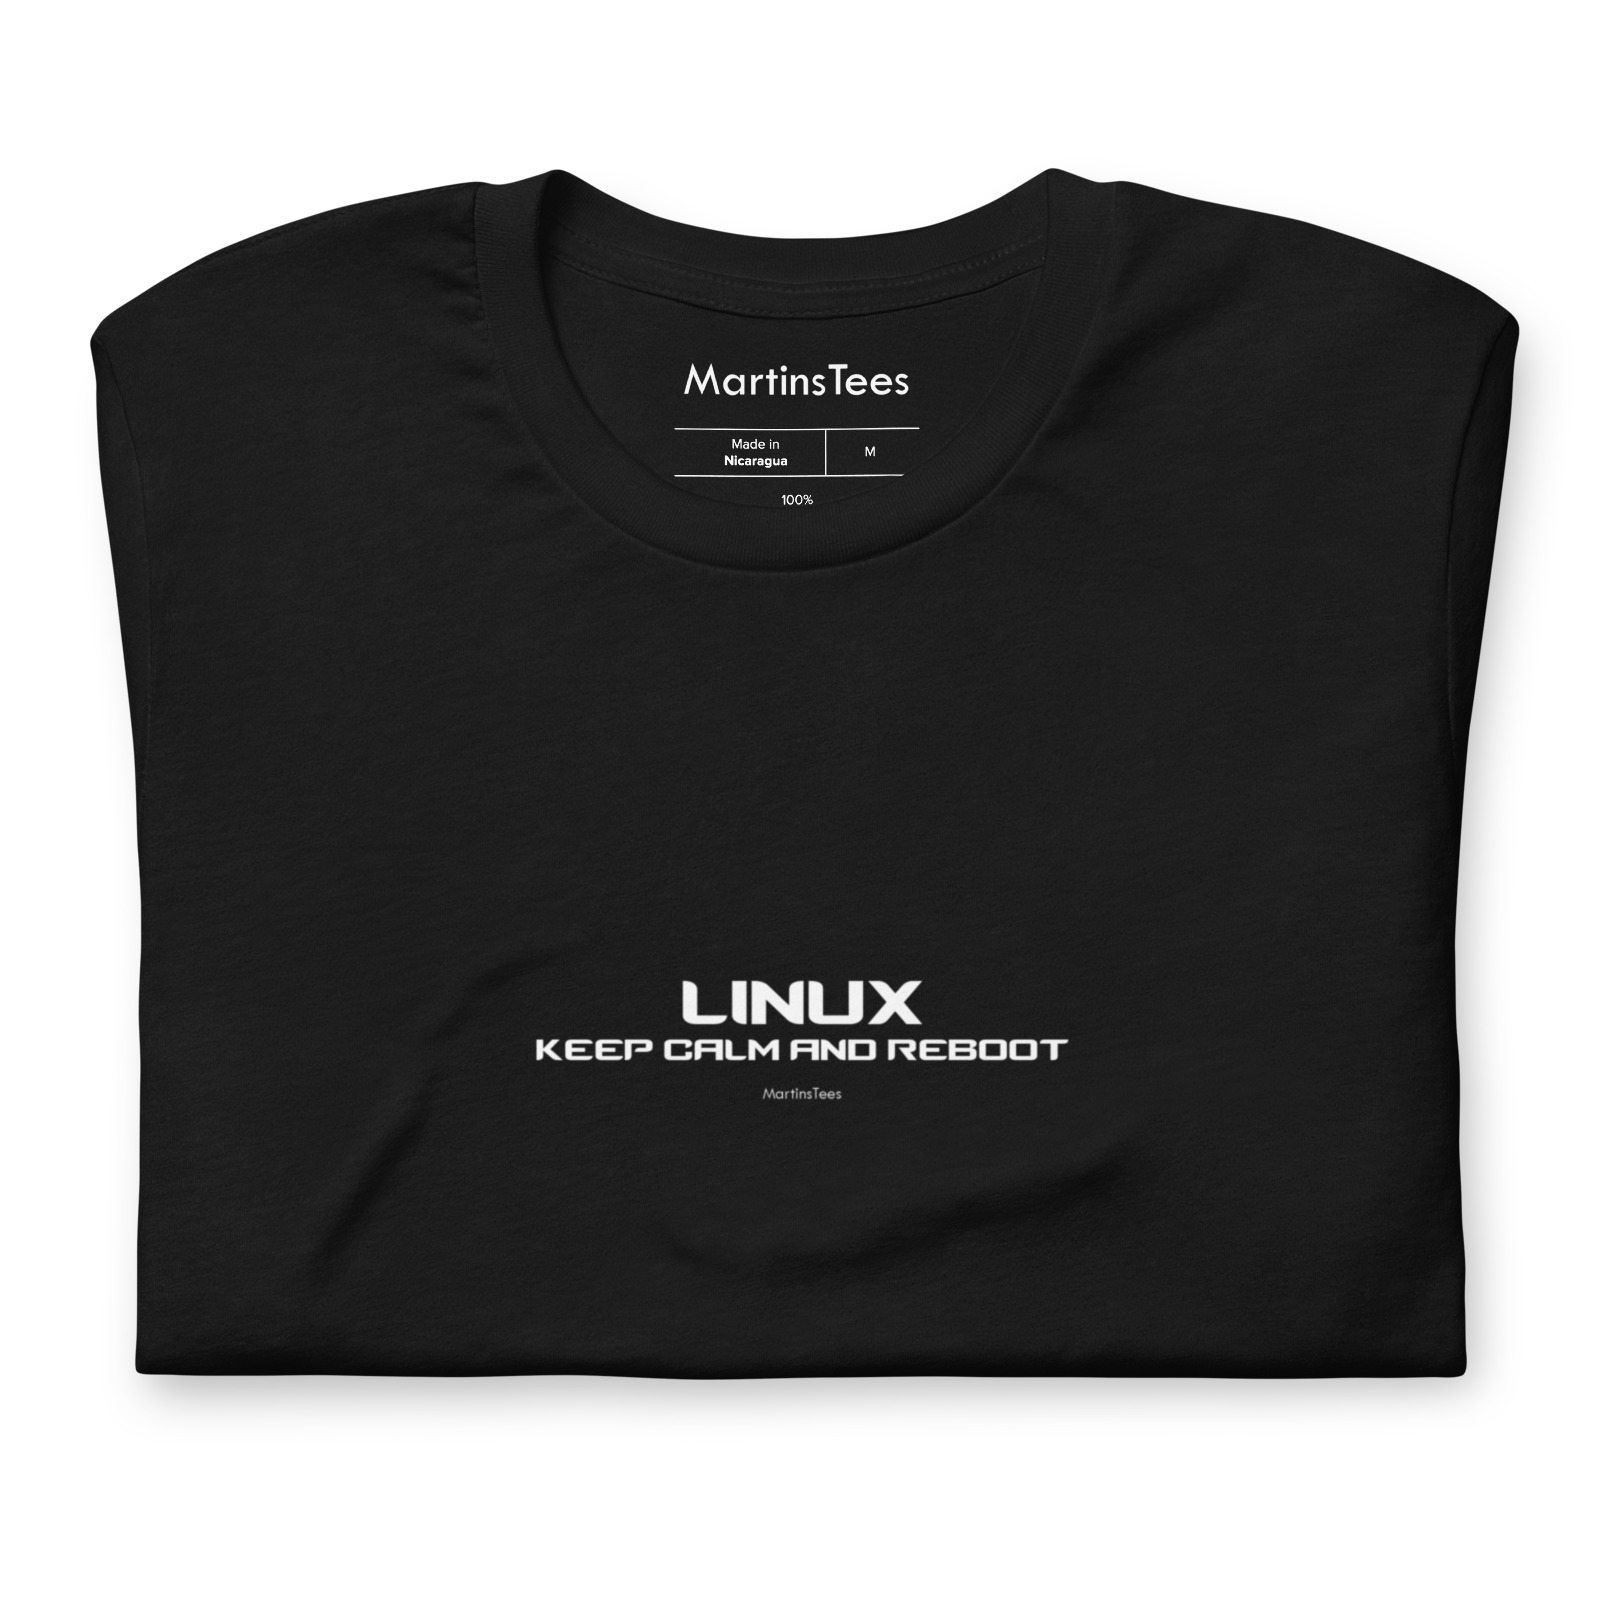 T-shirt: LINUX - KEEP CALM AND REBOOT